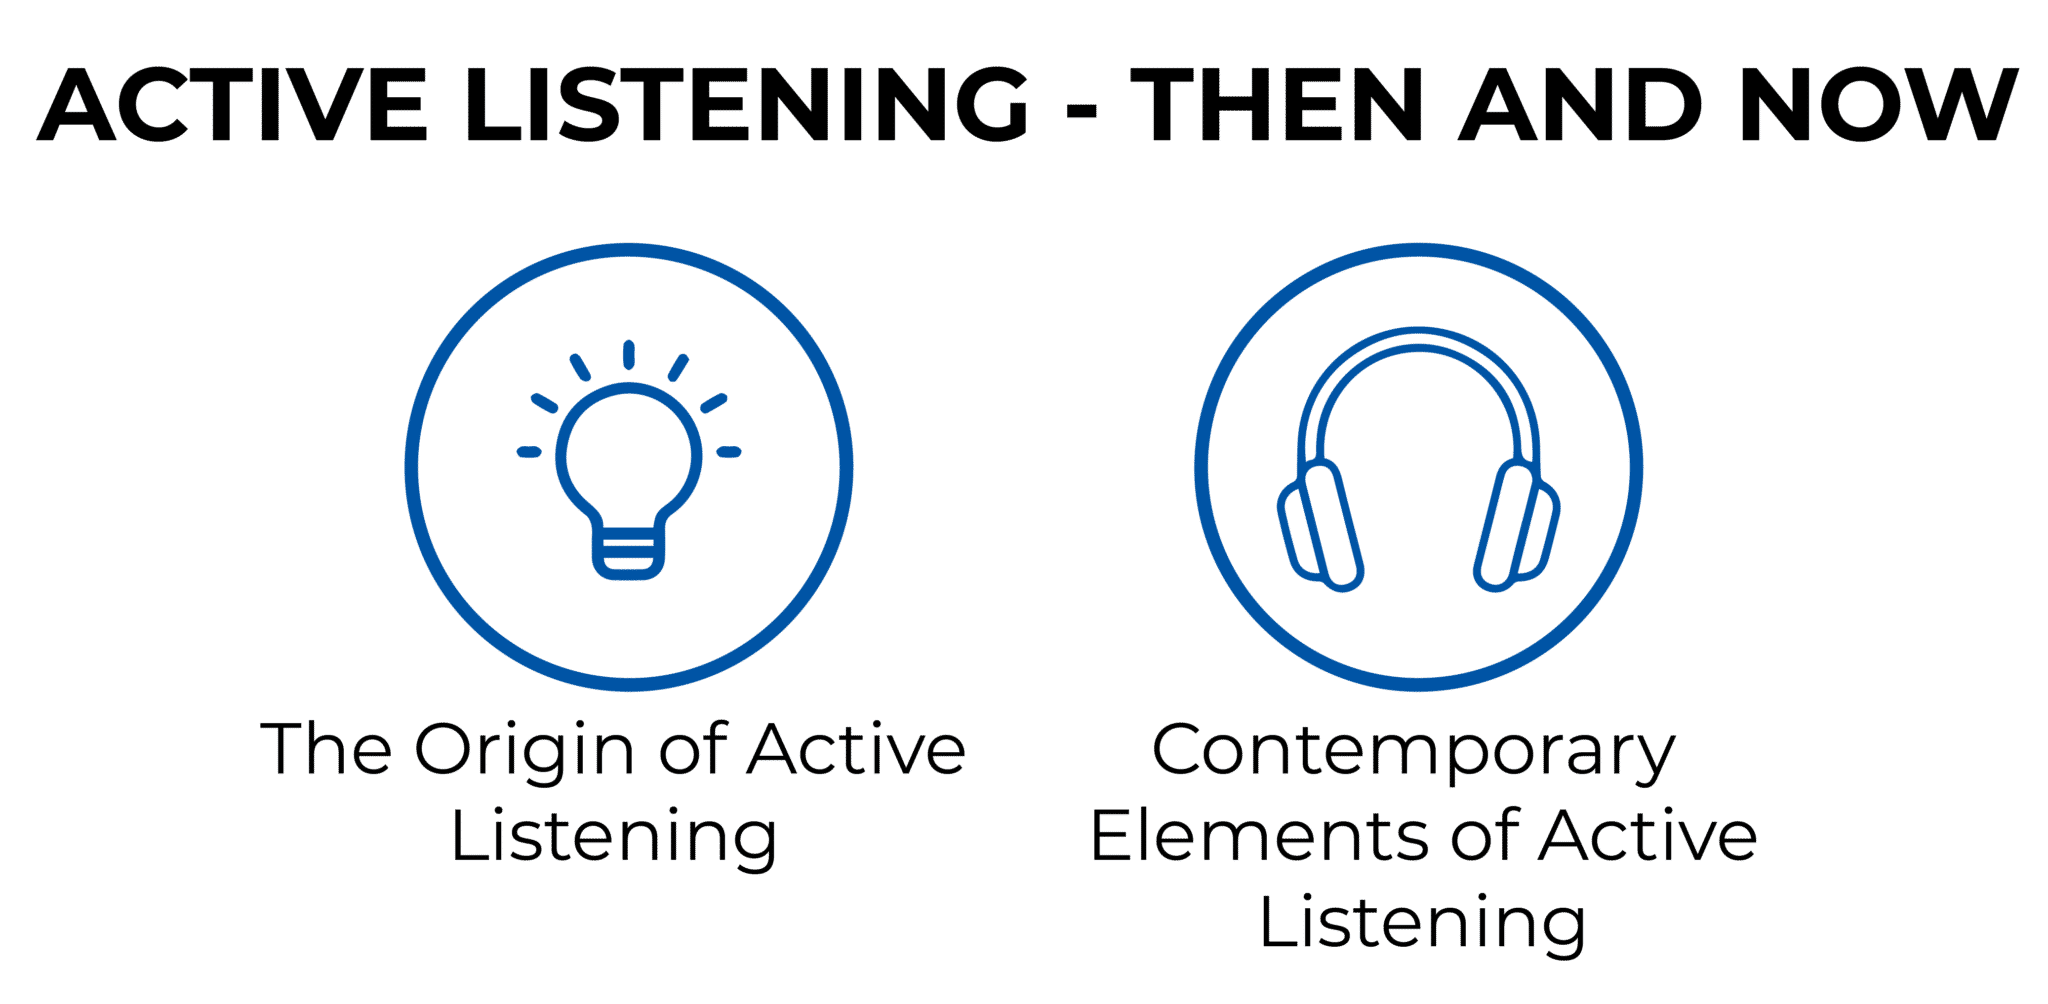 ACTIVE LISTENING - THEN AND NOW